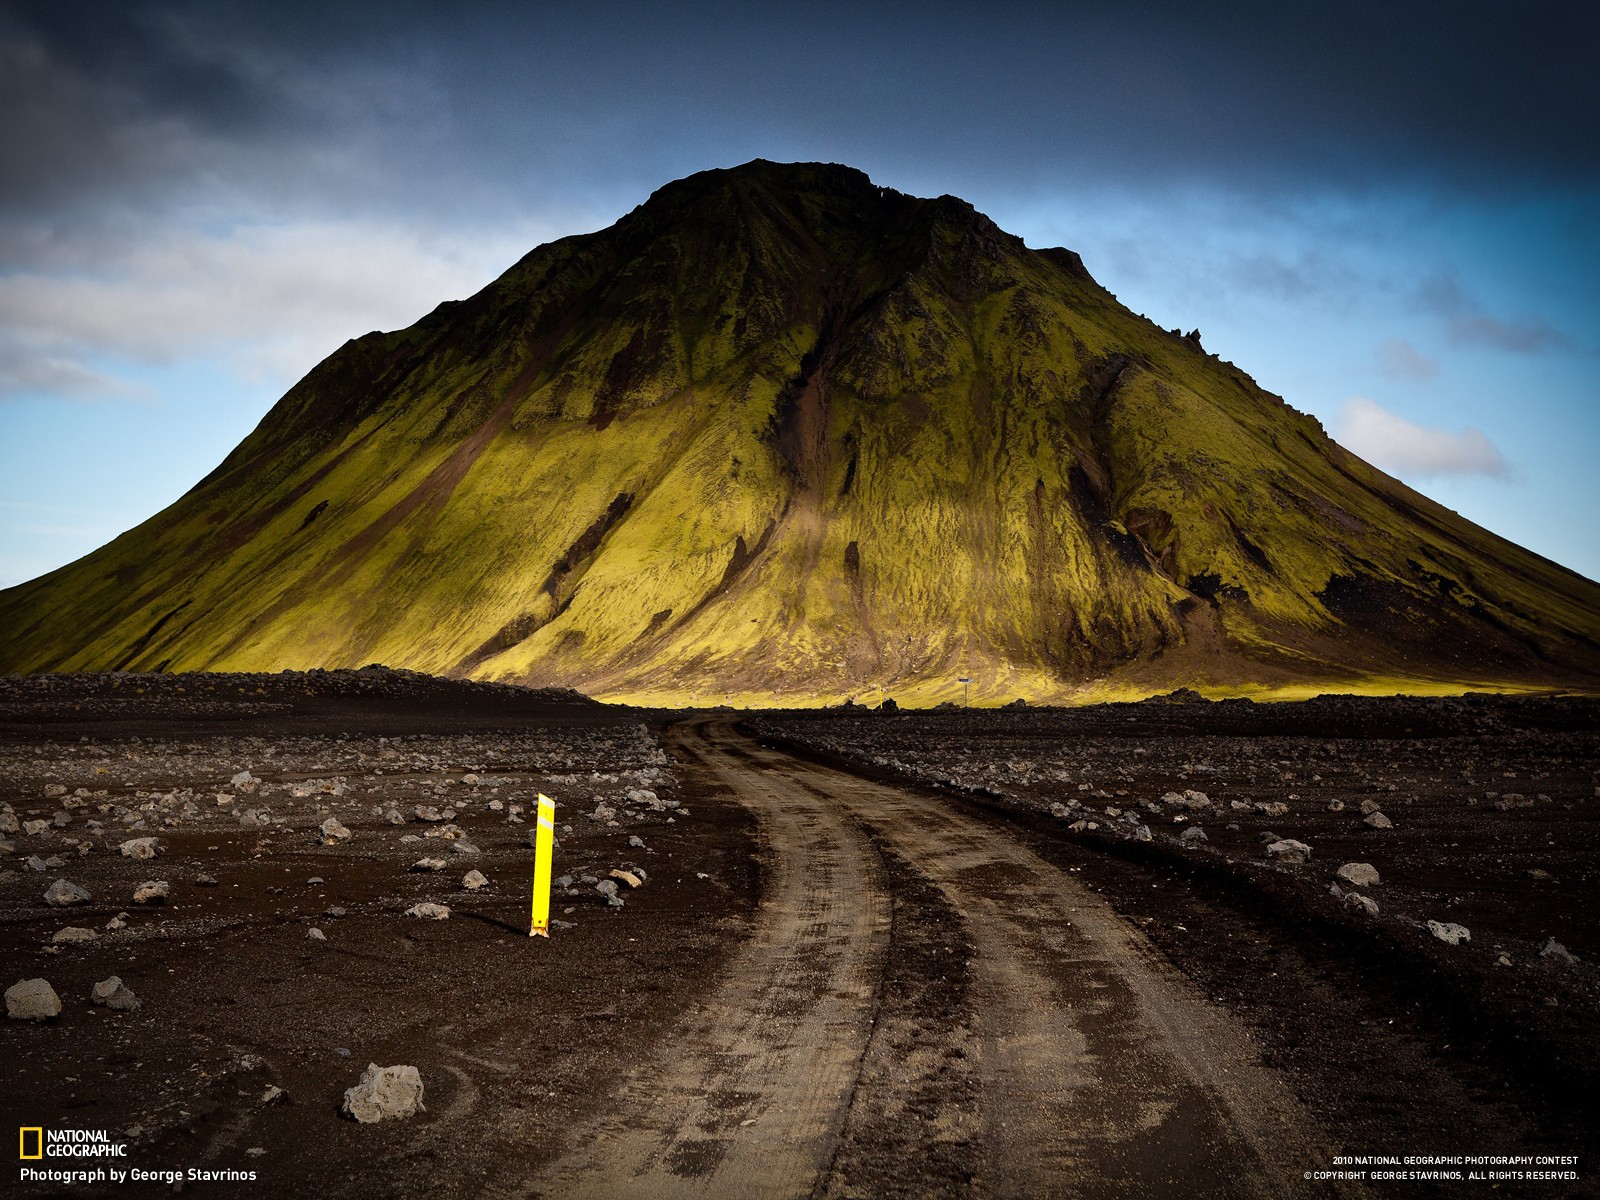 General 1600x1200 Iceland mountains dirt road landscape National Geographic nordic landscapes 2010 (Year)